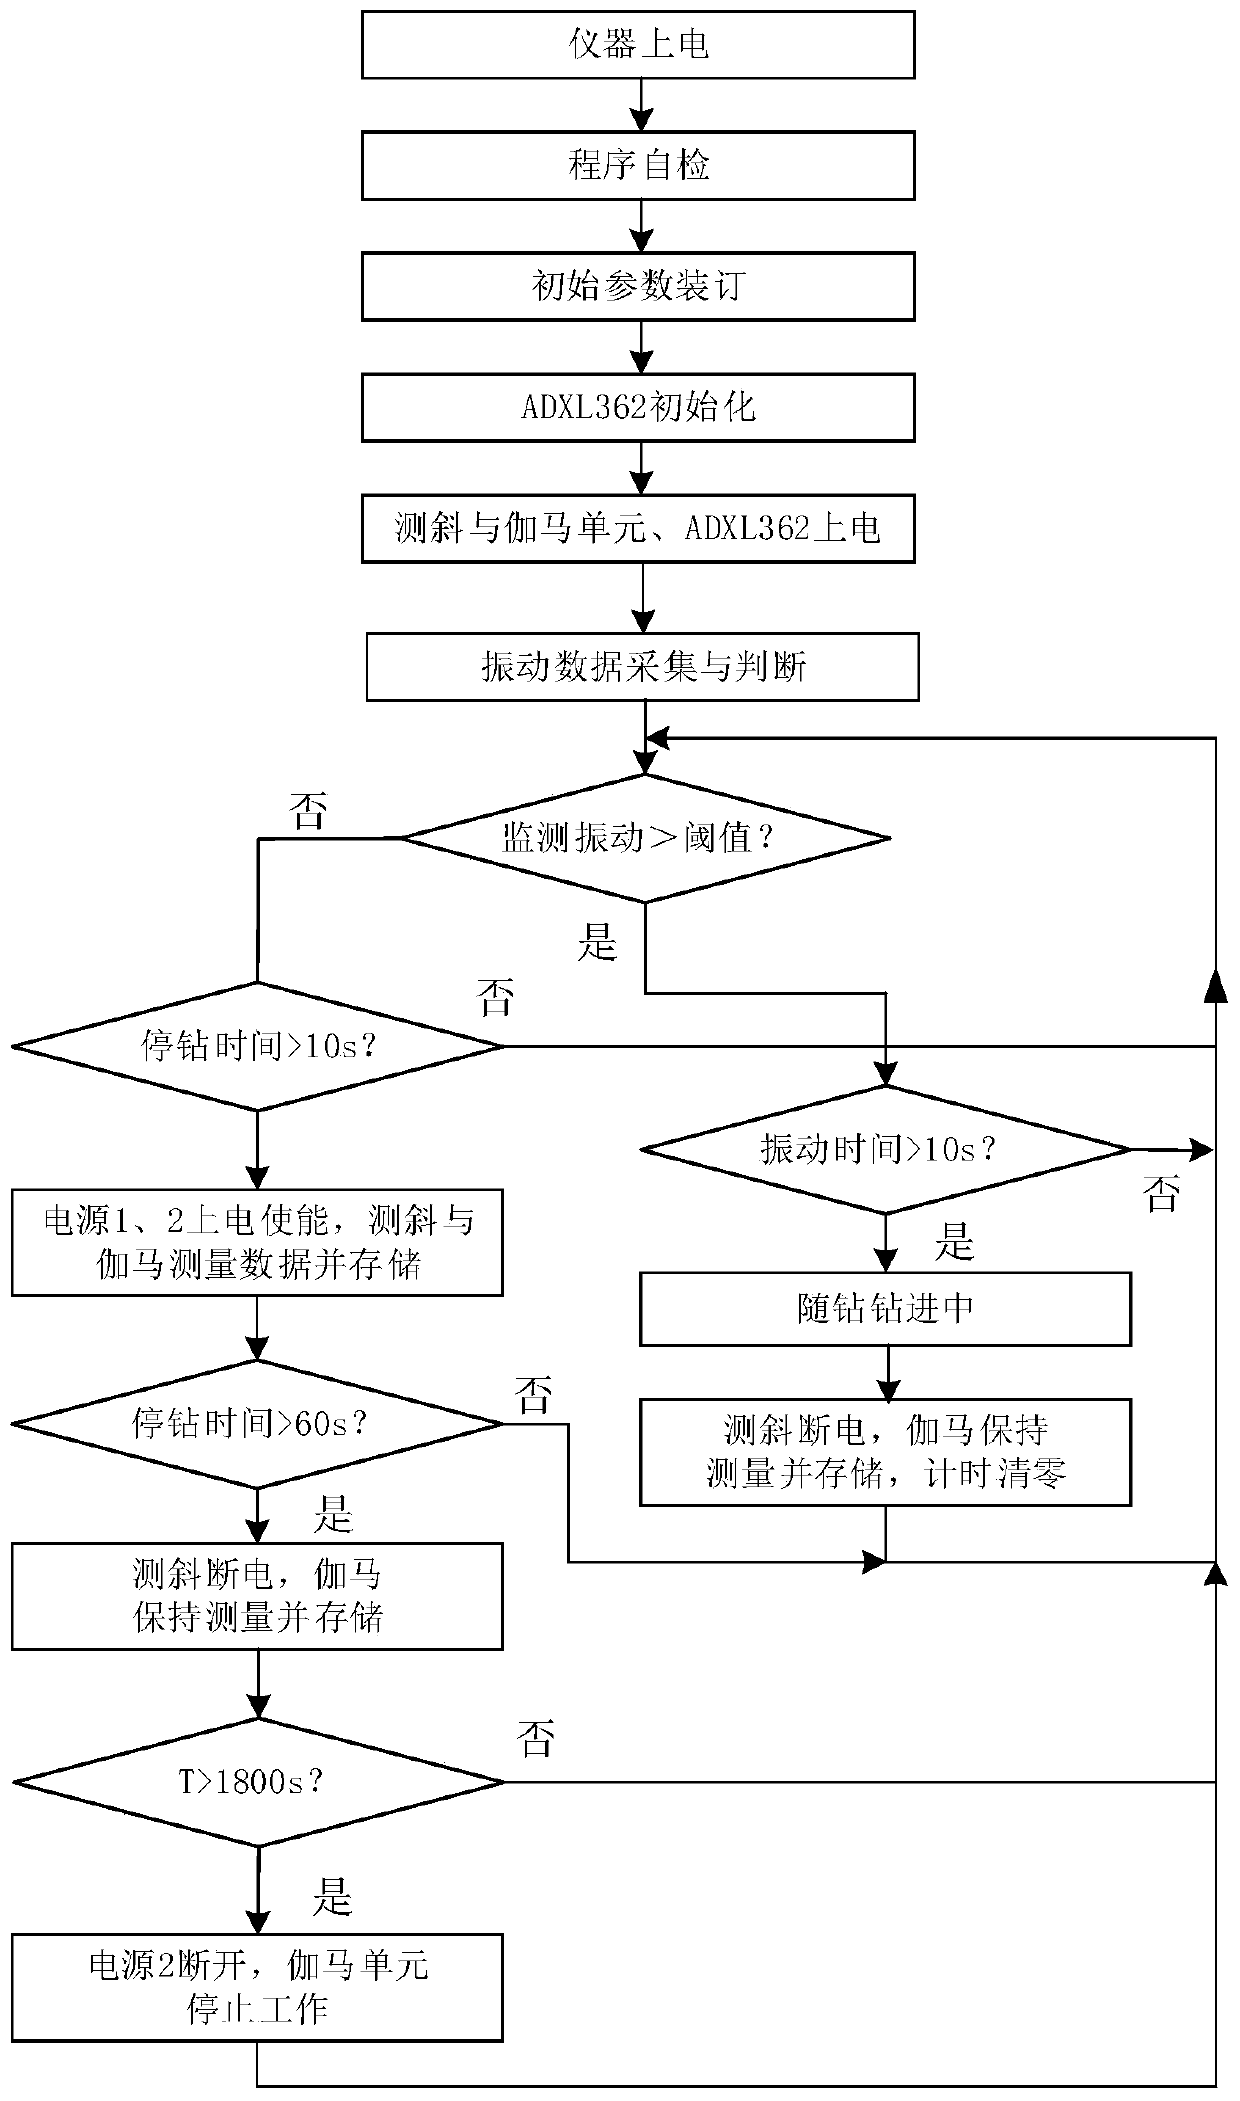 Power supply control method and system for logging-while-drilling detection pipe in underground coal mine